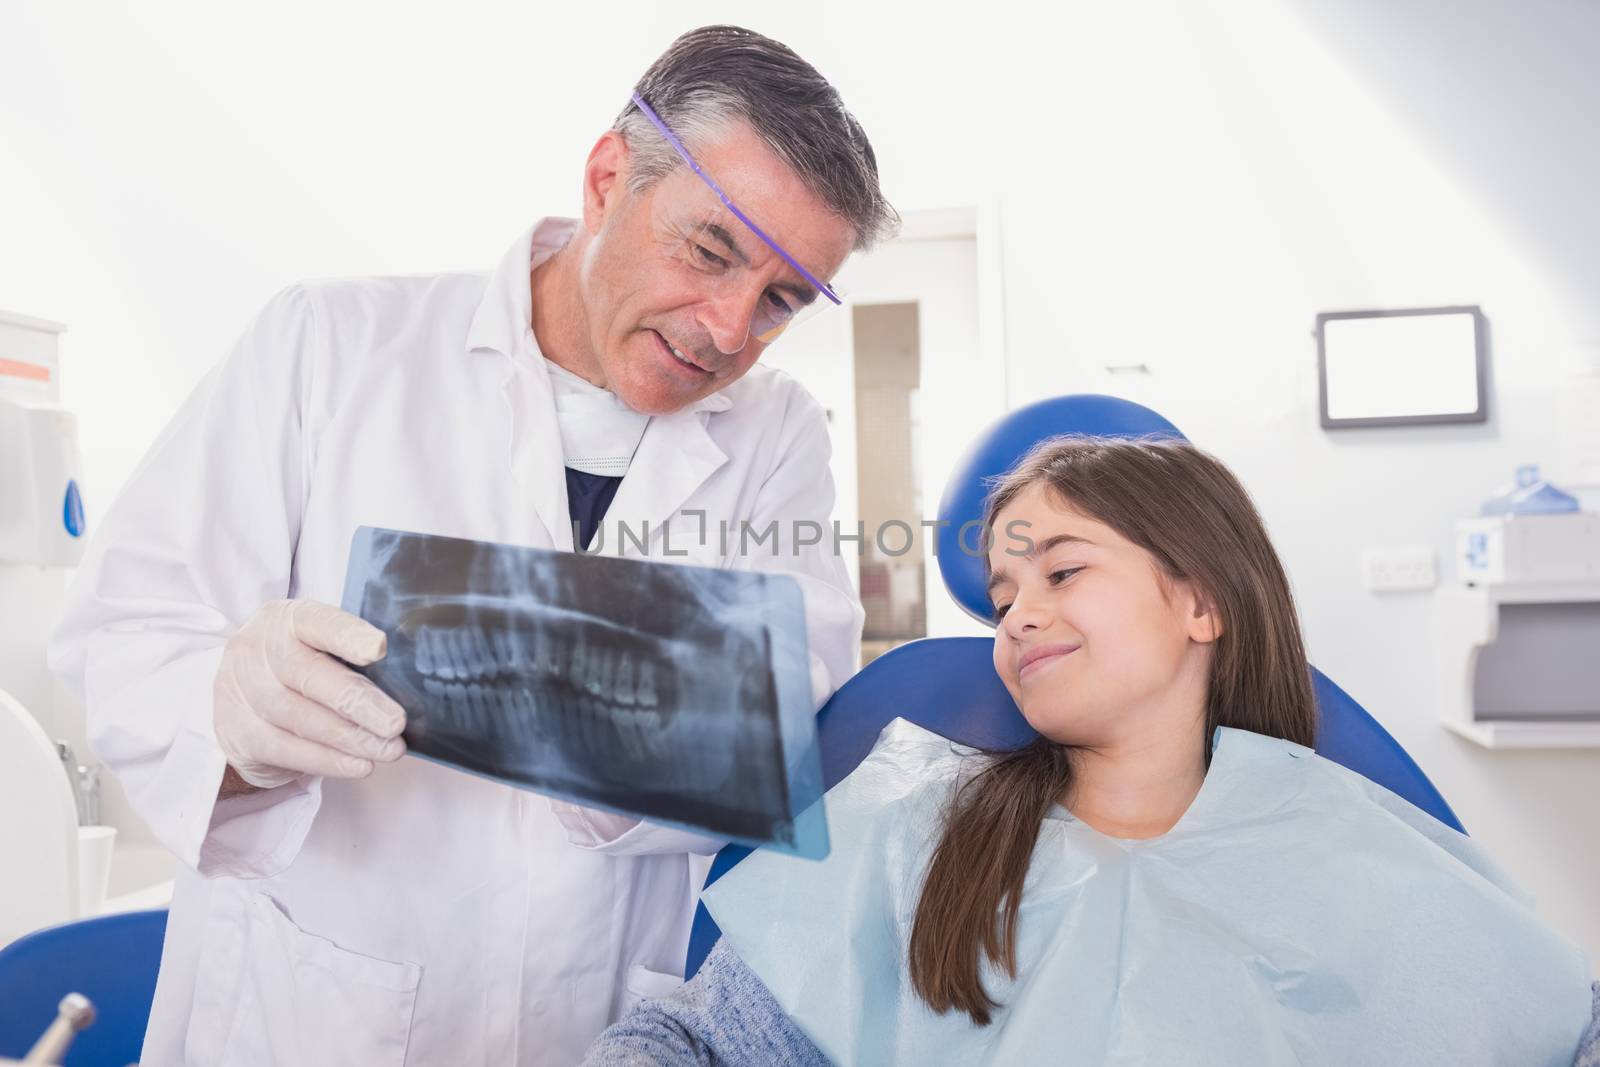 Pediatric dentist explaining to young patient the x-ray in dental clinic